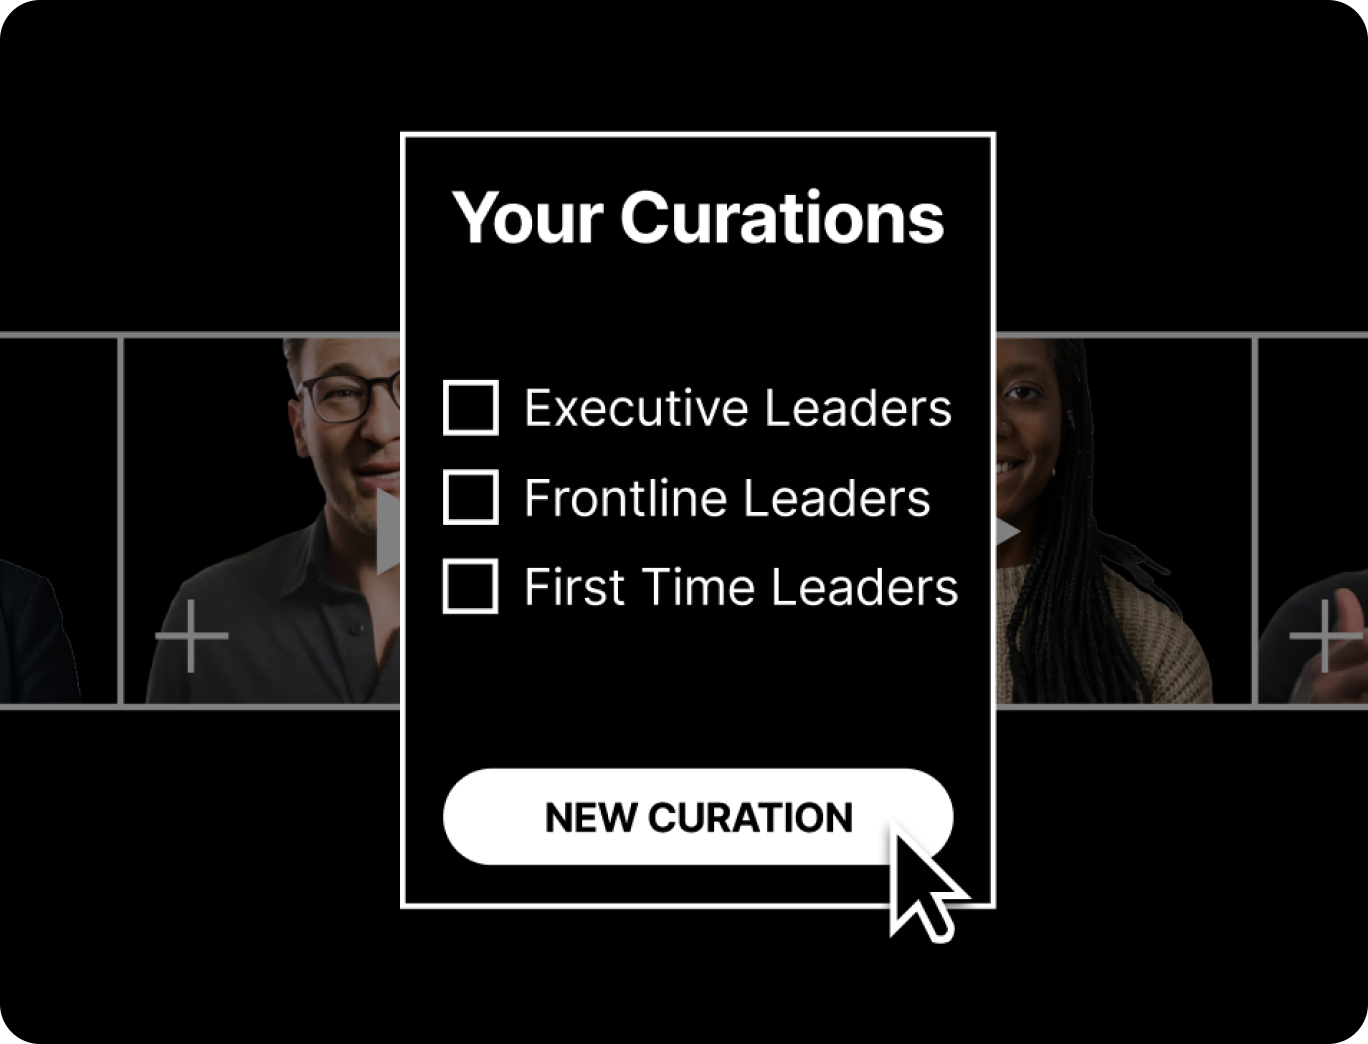 Digital interface titled "Your Curations" with options for different leadership roles and a "New Curation" button, flanked by images of a smiling man and woman.